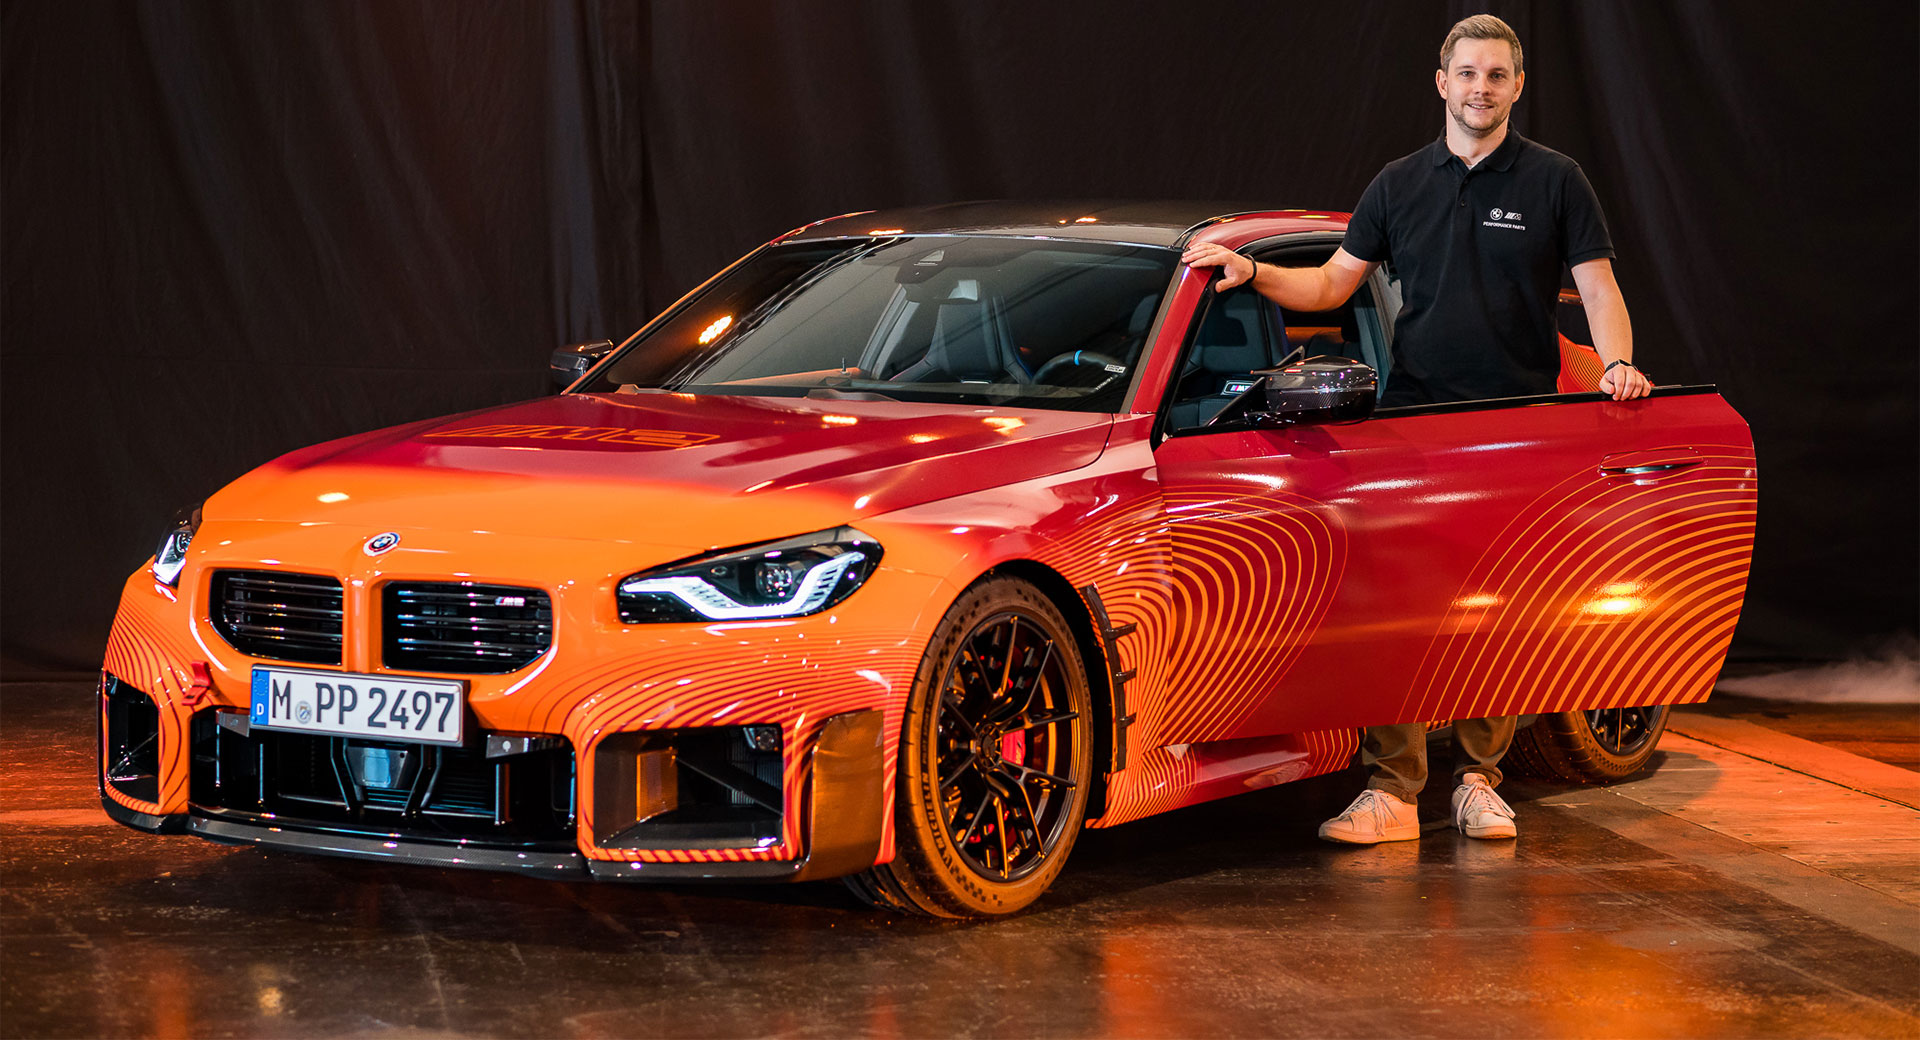 BMW's M Performance Parts For The New M2 Are Not For The Faint Hearted